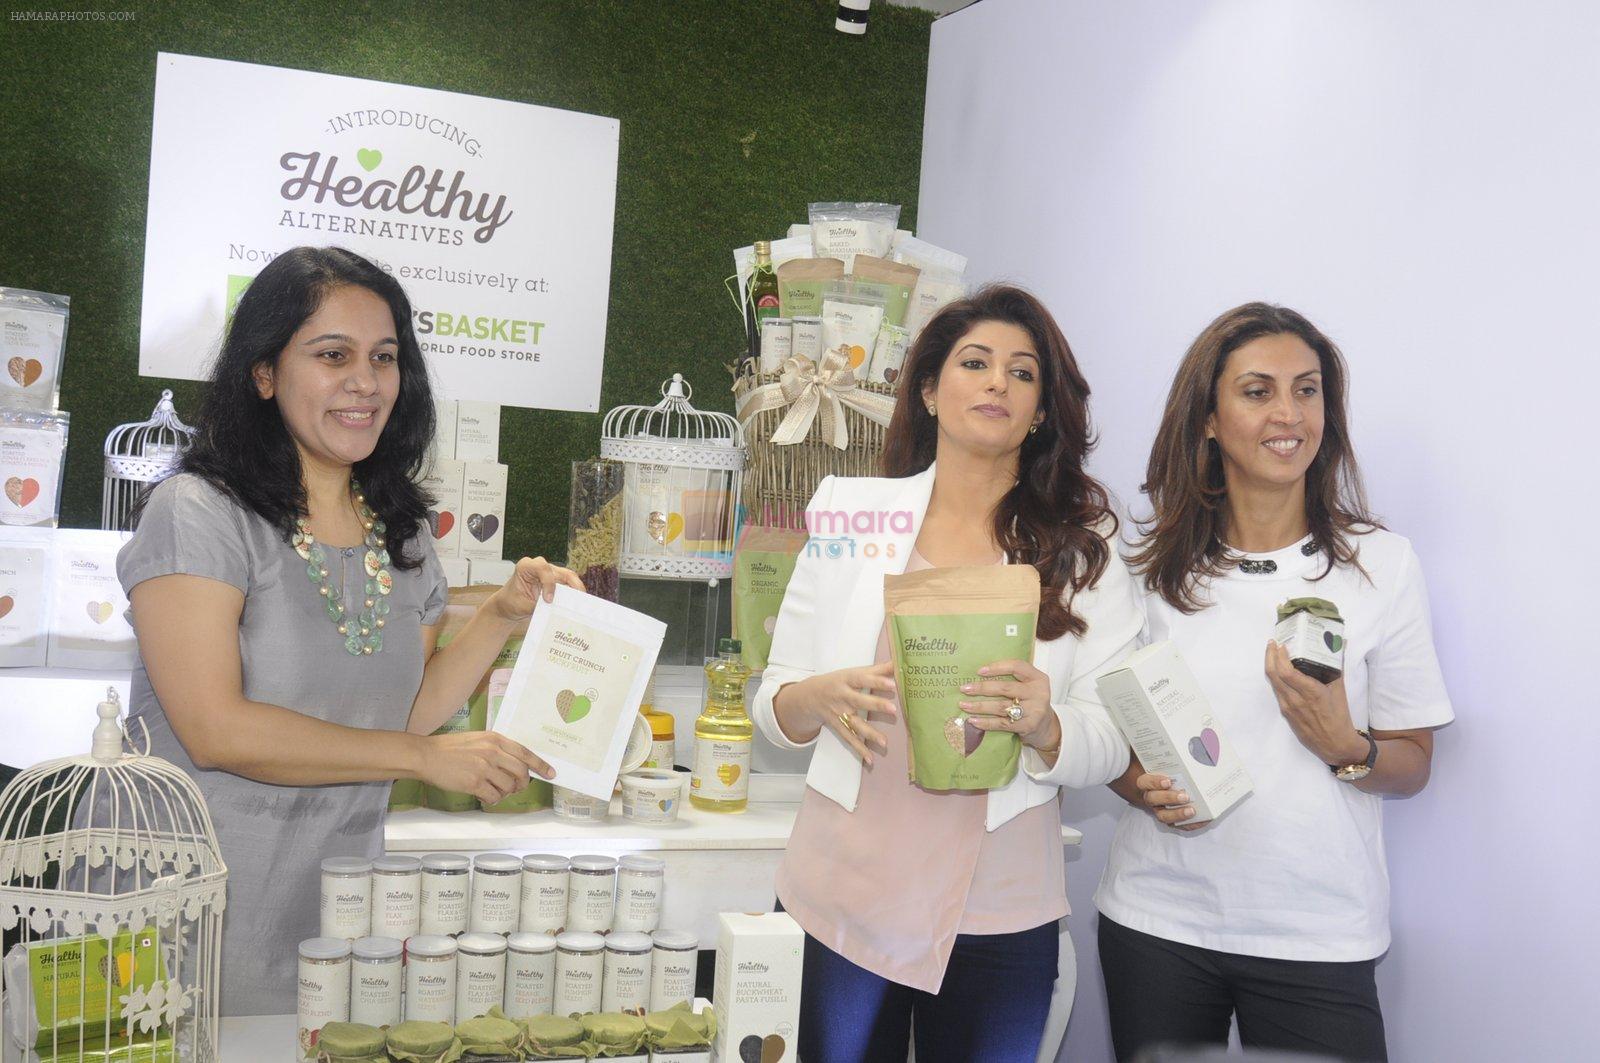 Twinkle Khanna during the launch of Godrej Nature's Basket Healthy Alternatives products in Mumbai on 27th Sept 2016